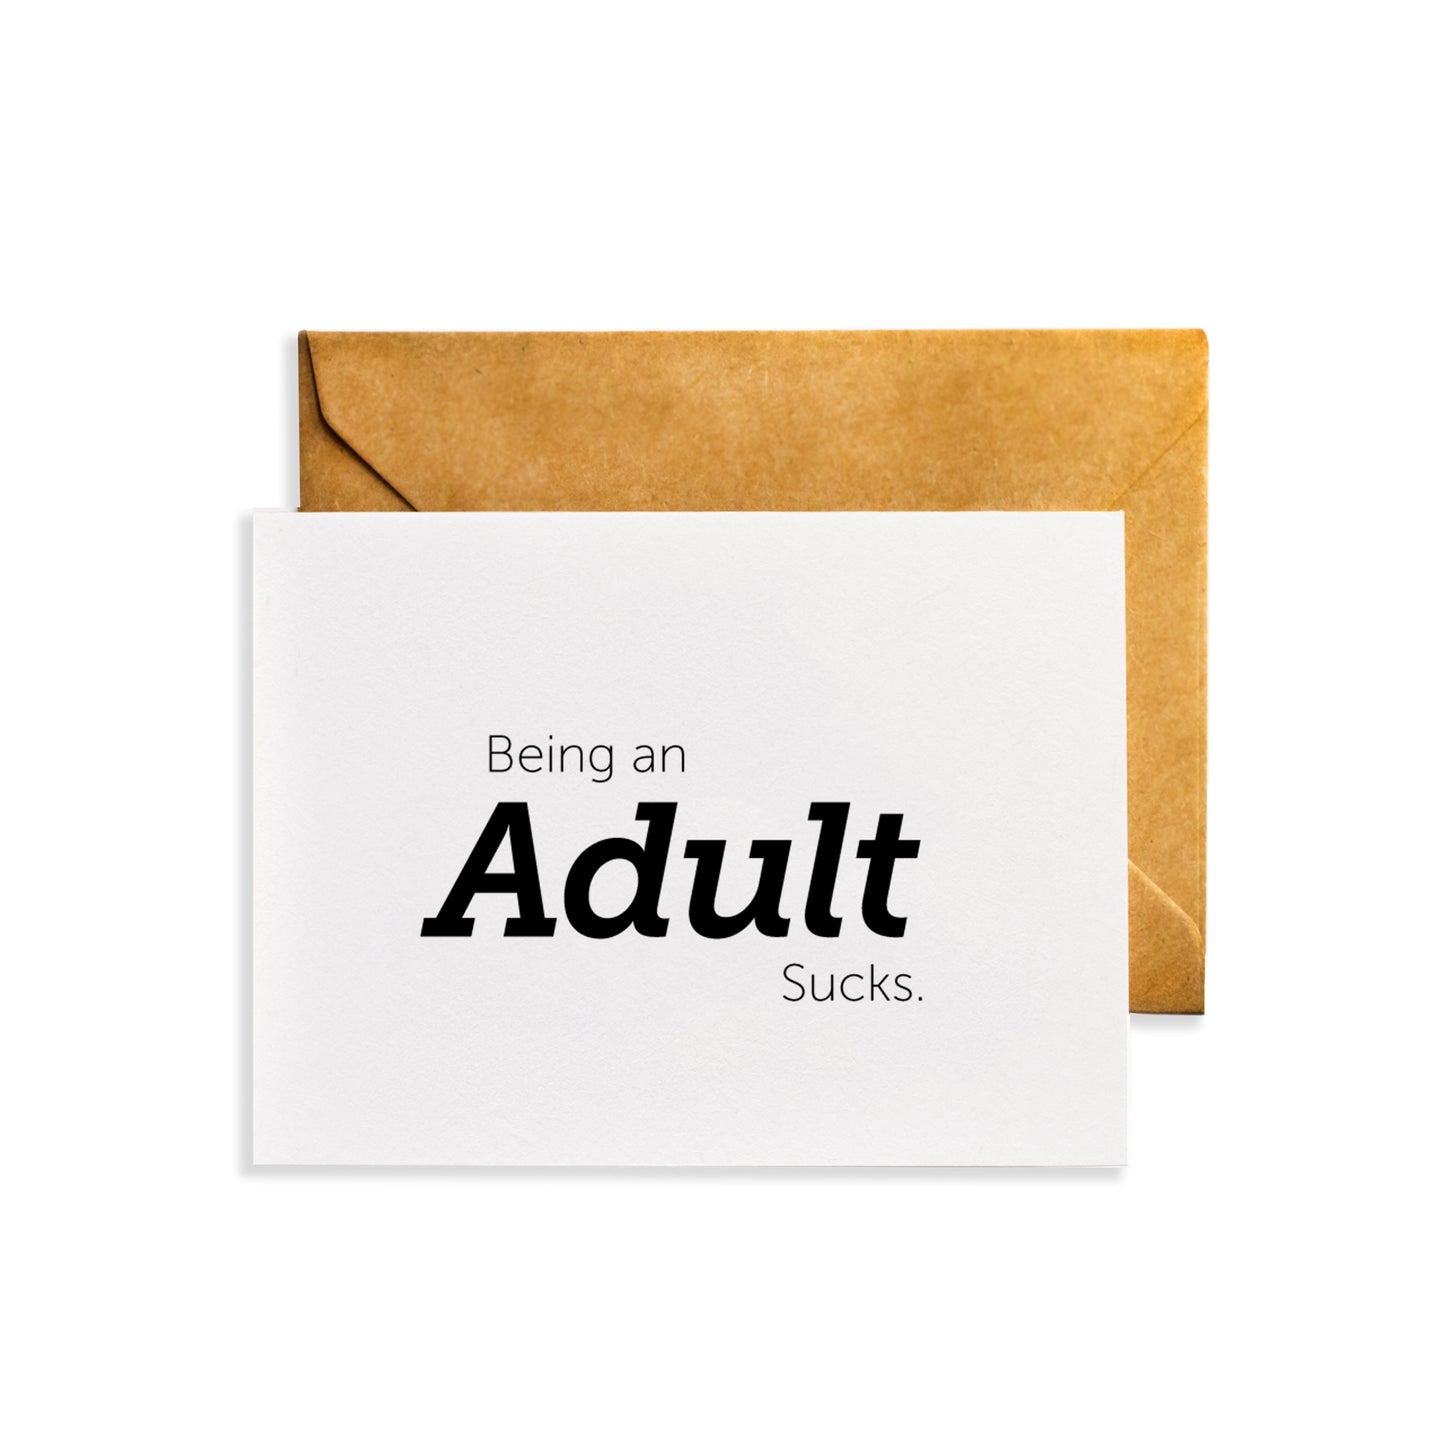 Being an Adult Sucks - Funny Snarky Birthday Card